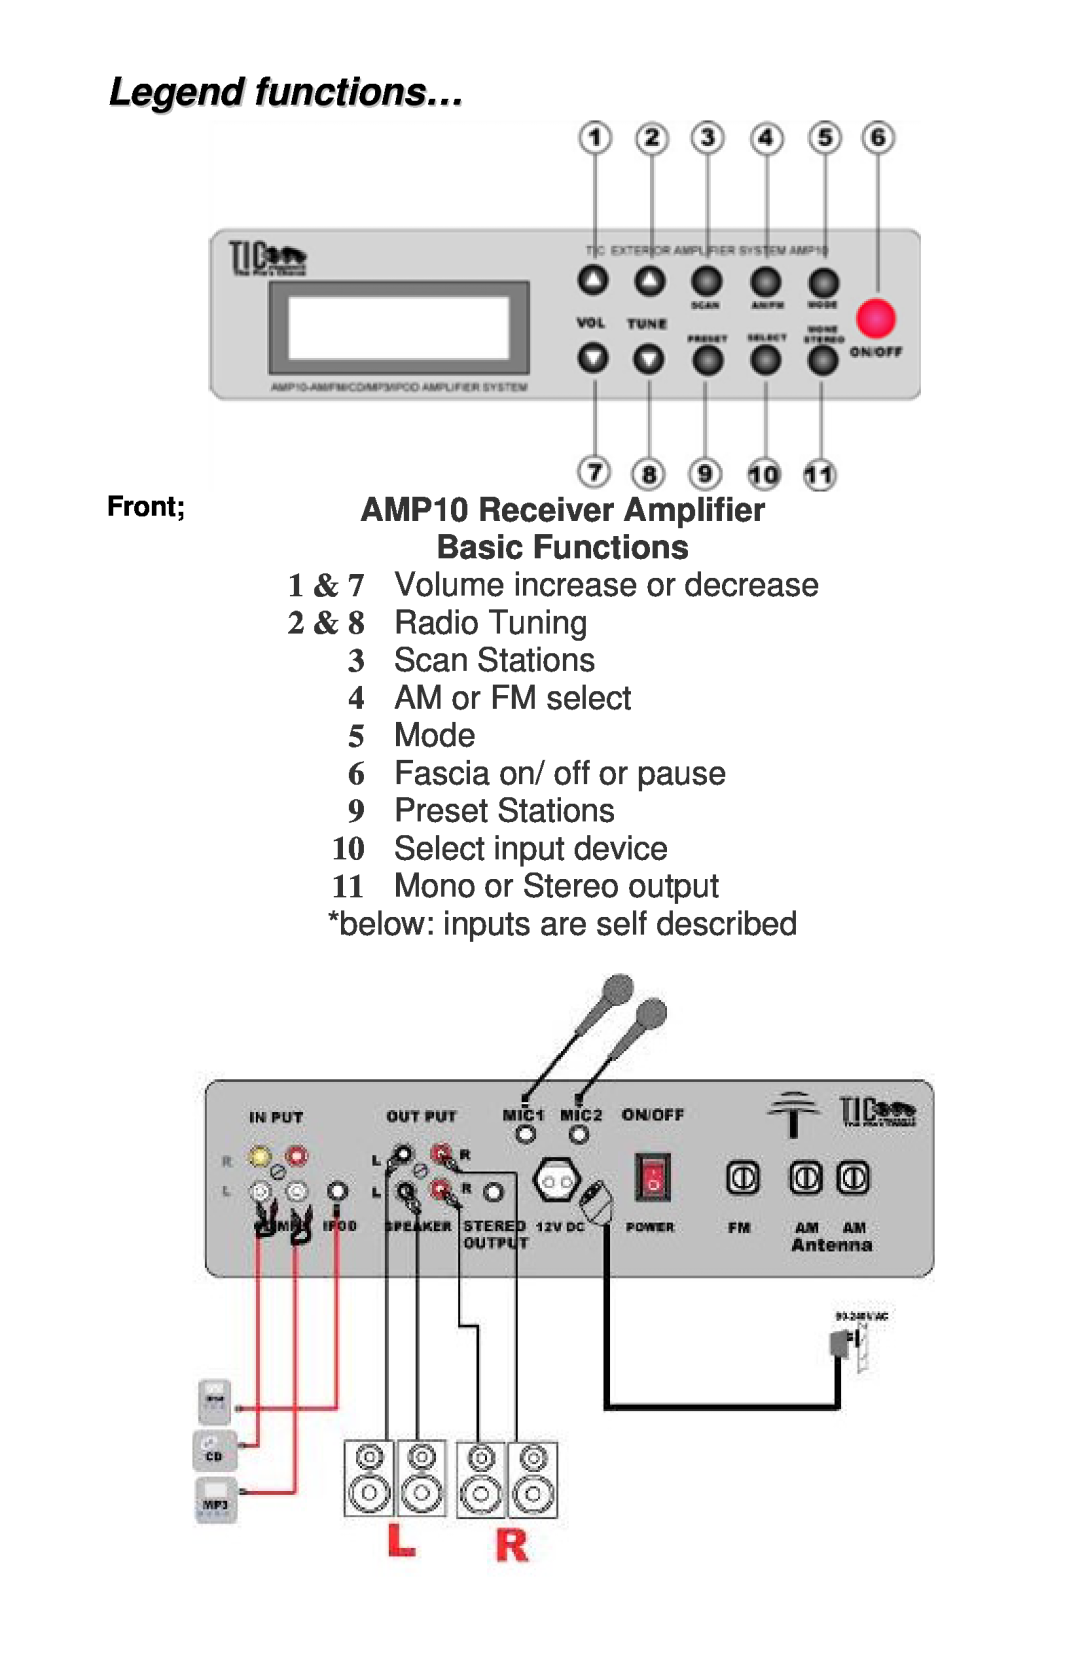 TIC manual Legend functions…, AMP10 Receiver Amplifier, Basic Functions, Volume increase or decrease, Radio Tuning, Mode 